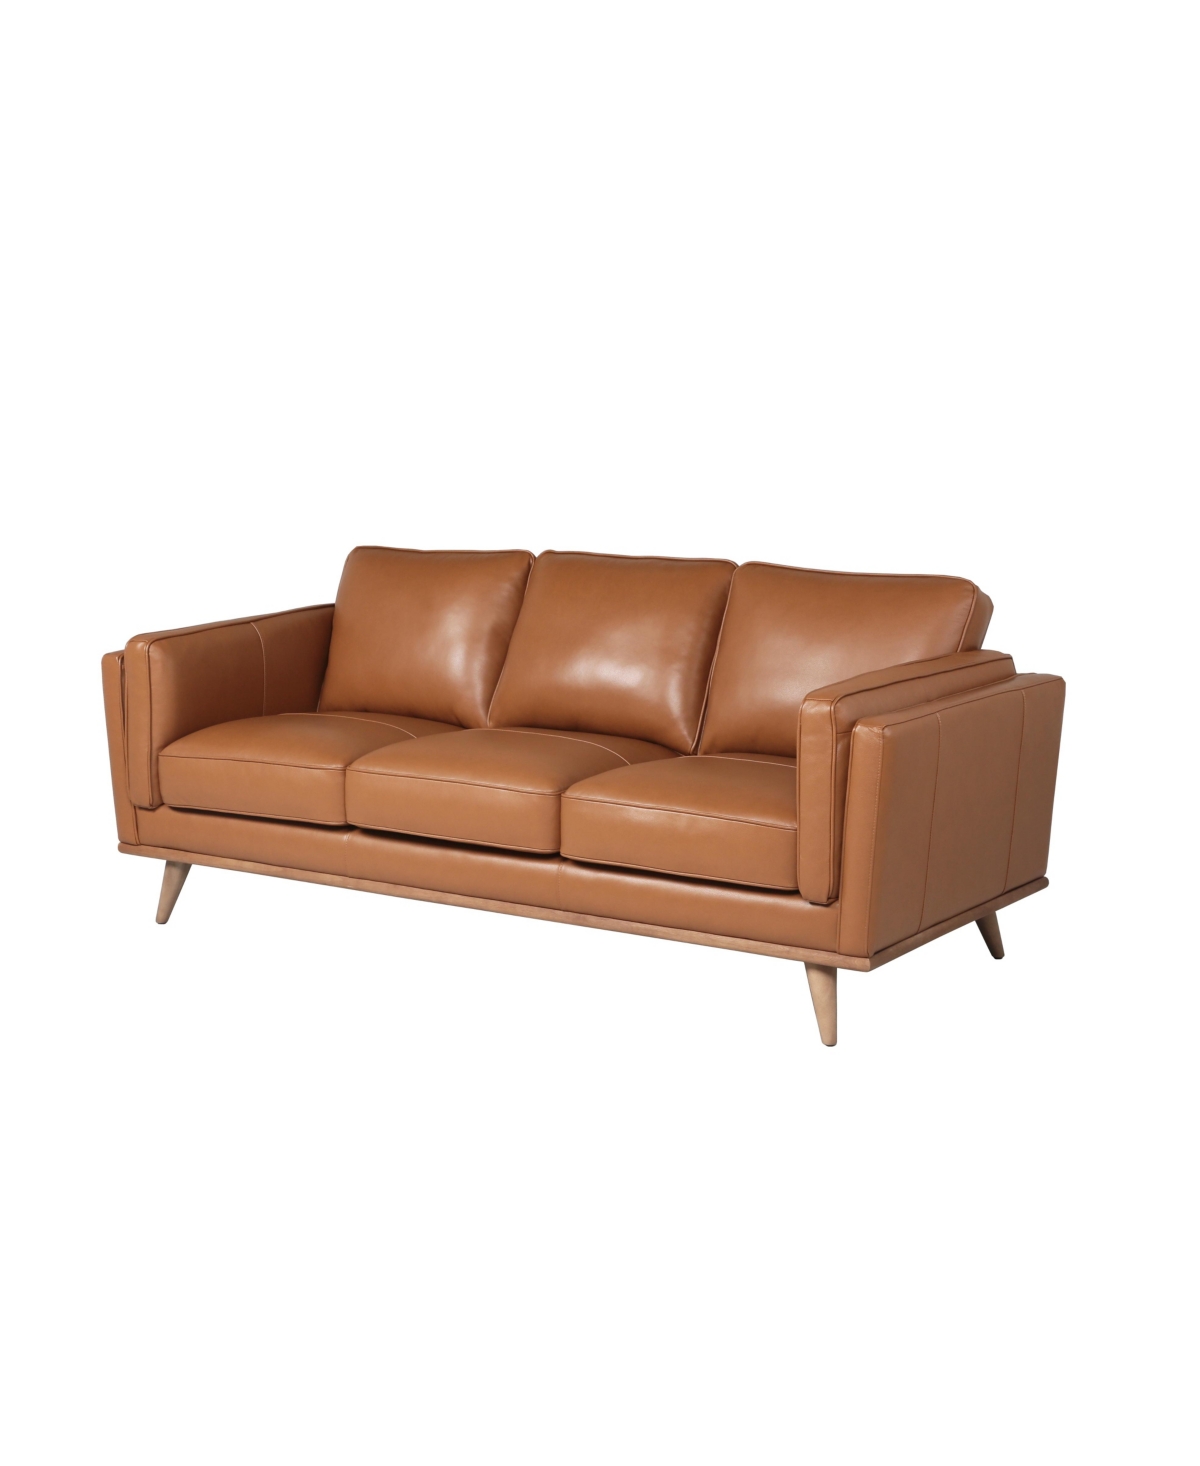 Nice Link Addison 83" Mid-century Modern Leather Sofa In Camel Brown